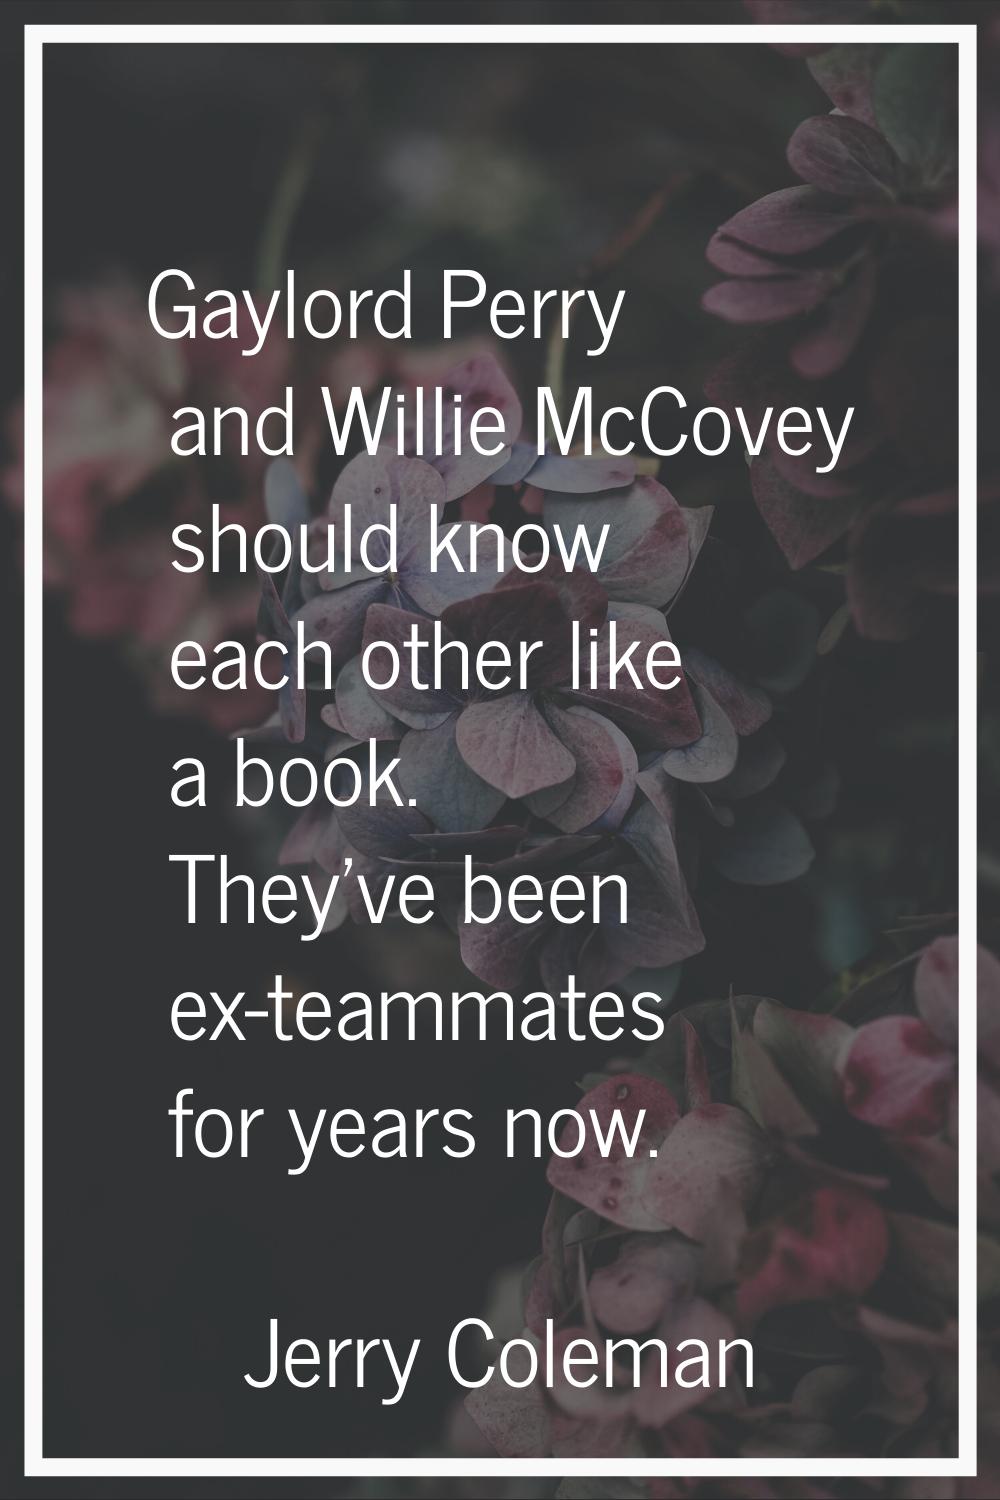 Gaylord Perry and Willie McCovey should know each other like a book. They've been ex-teammates for 